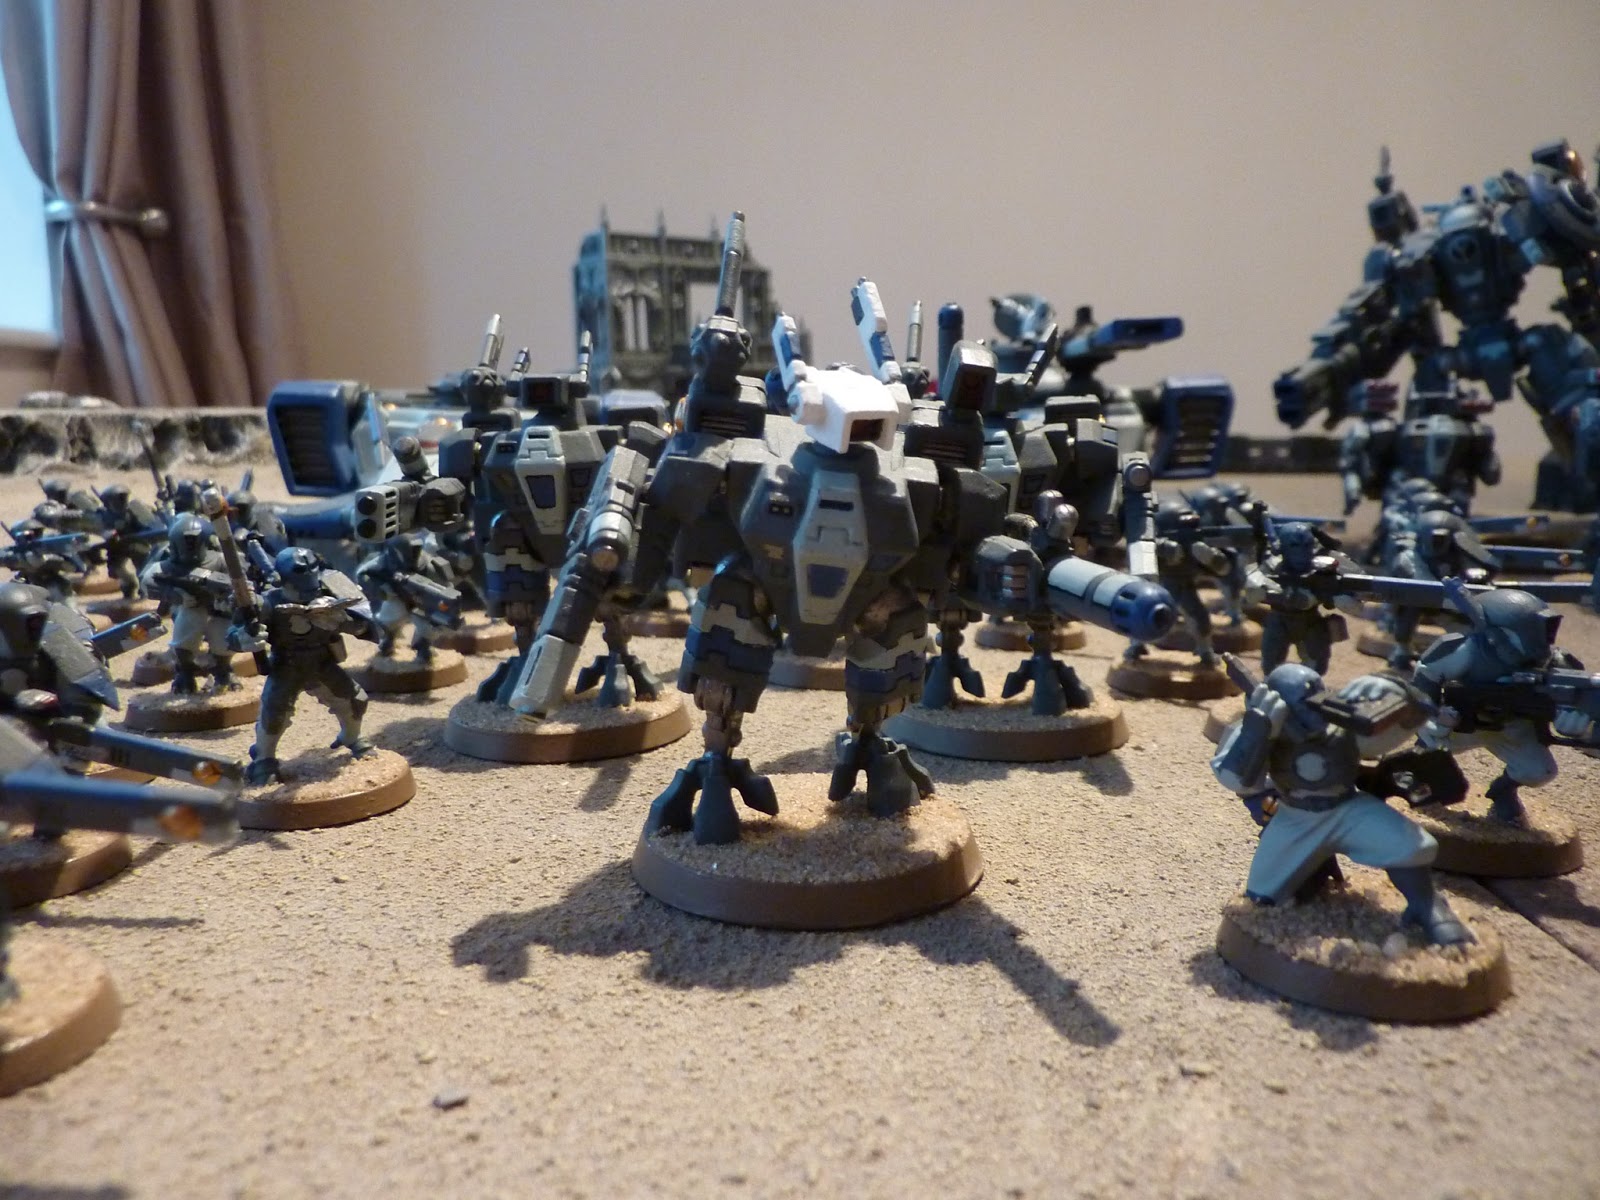 How to Start a Tau Empire Army in Warhammer 40K - Overview and First  Purchases? 